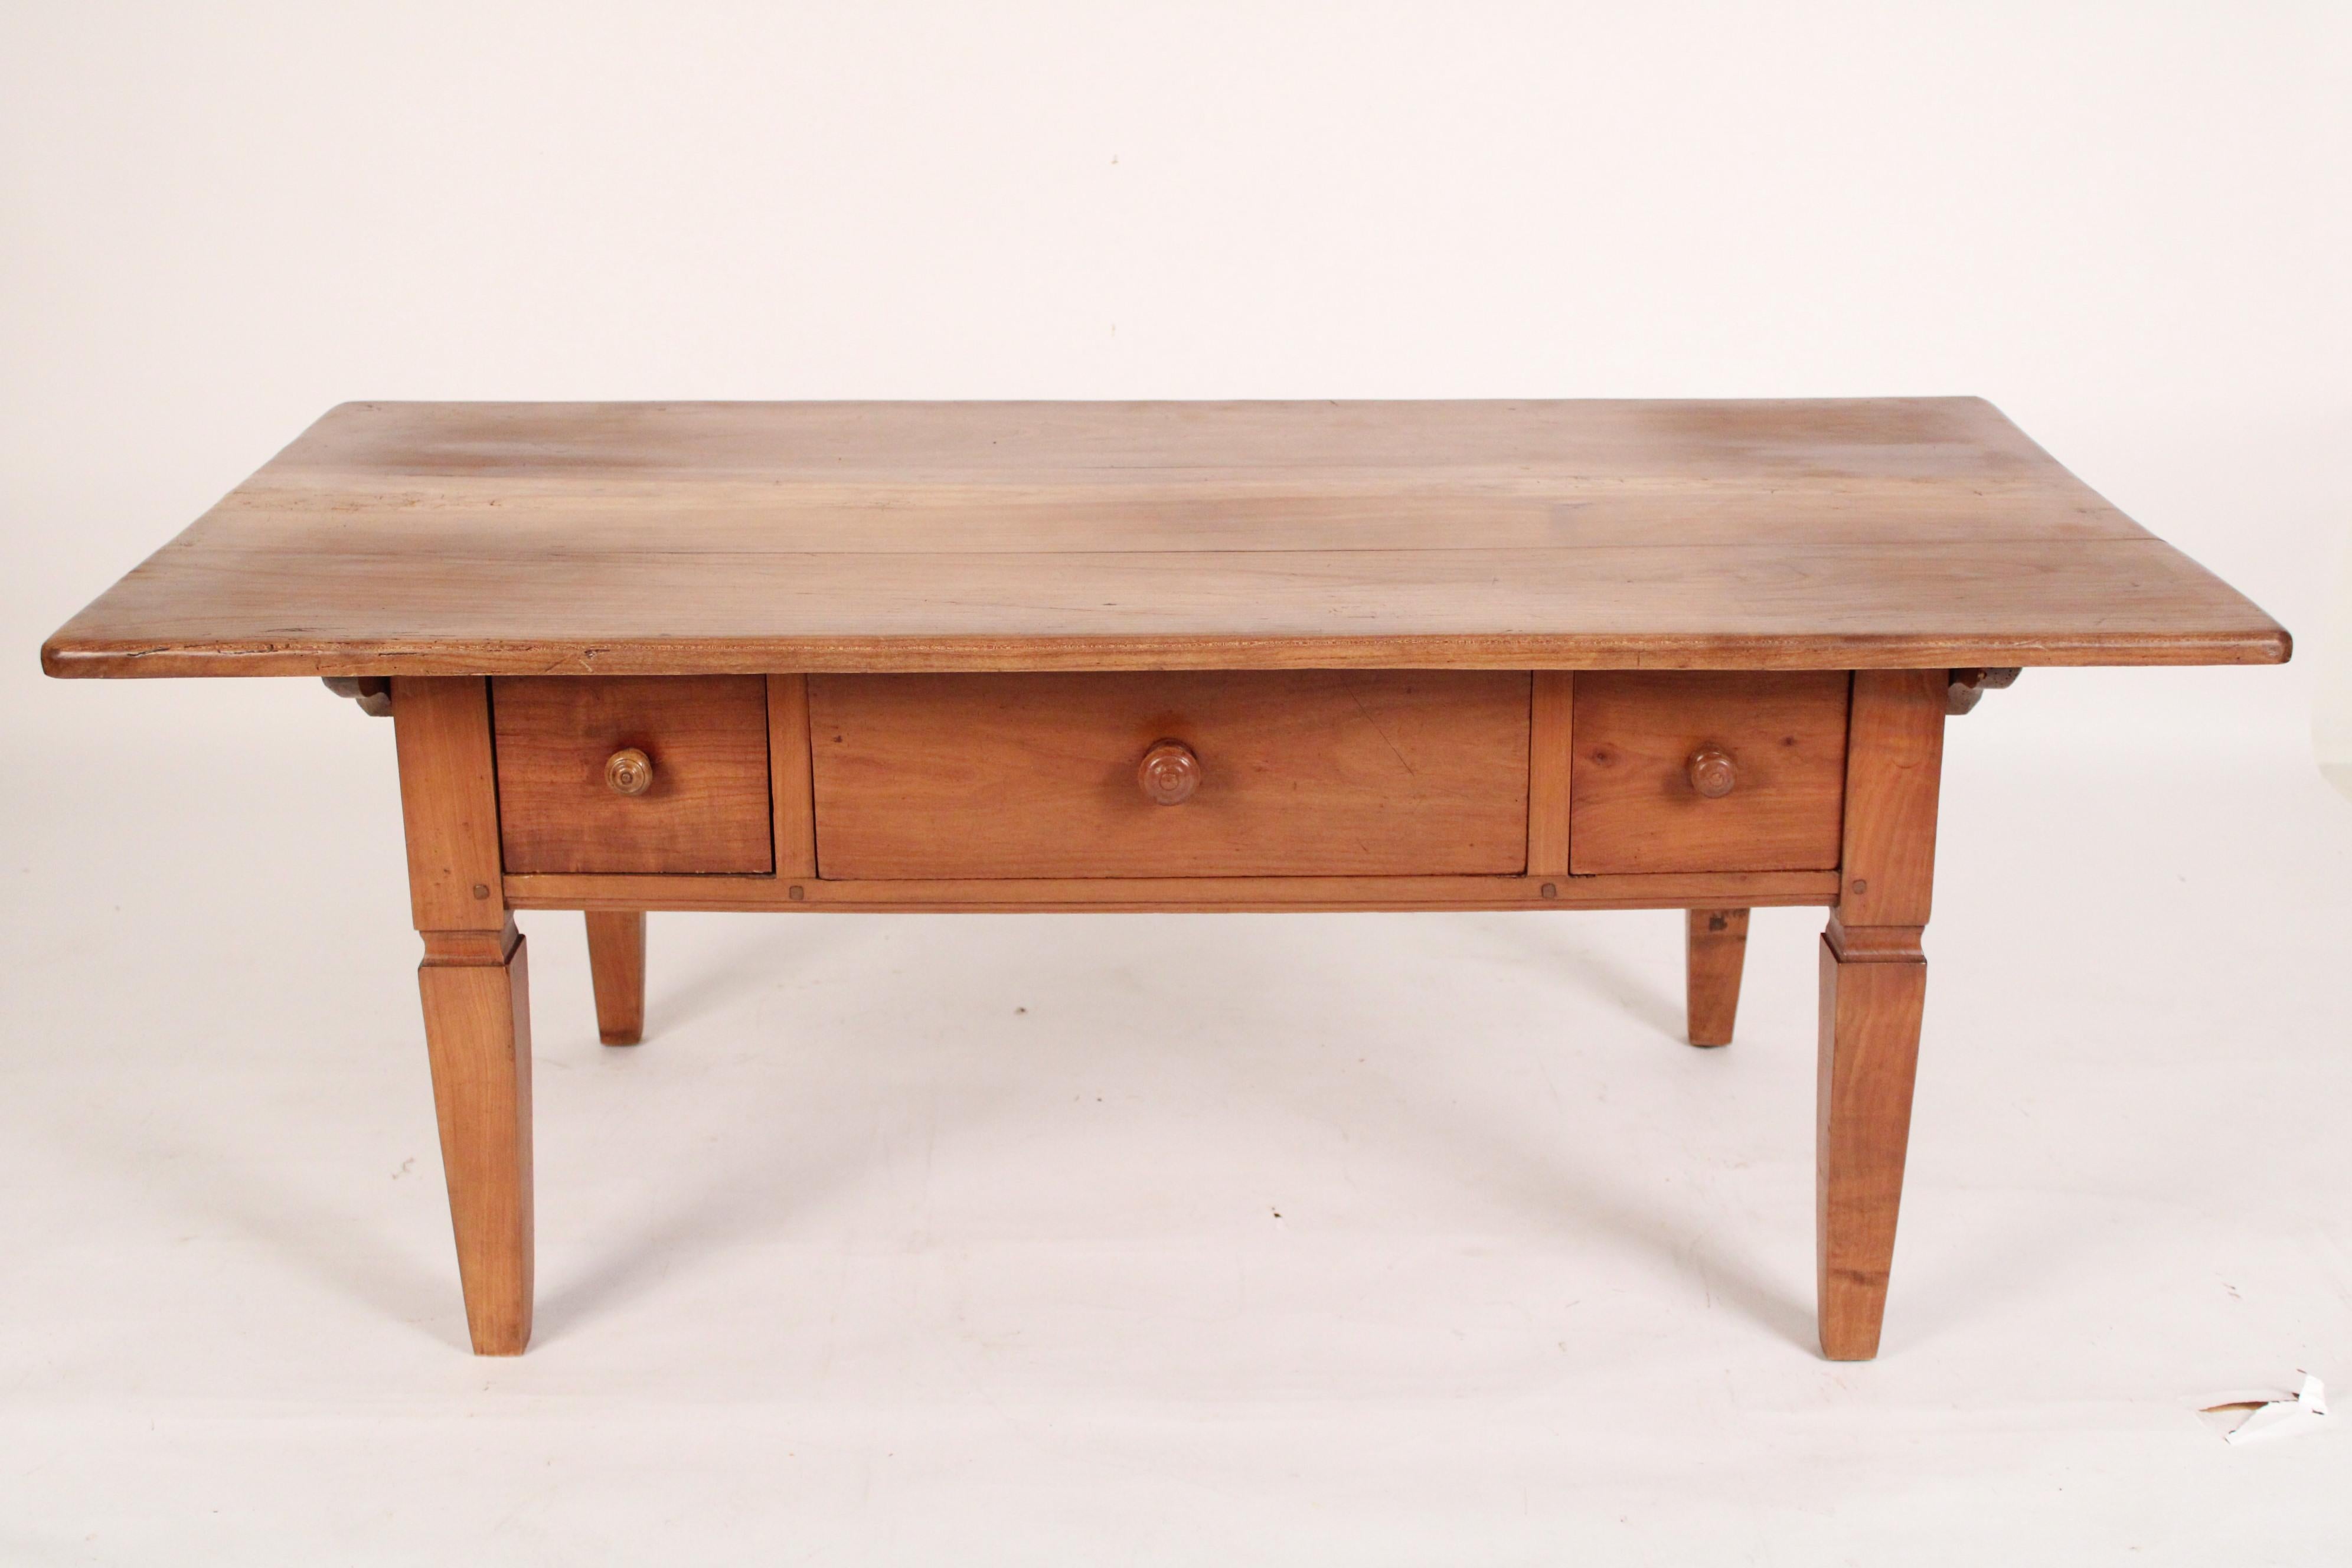 Antique Directoire style fruit wood coffee table, 19th century. With an overhanging 3 board top, 3 frieze drawers with wood knobs, resting on square tapered legs. Mortise, tenon and peg frame construction and hand dovetailed drawer construction.